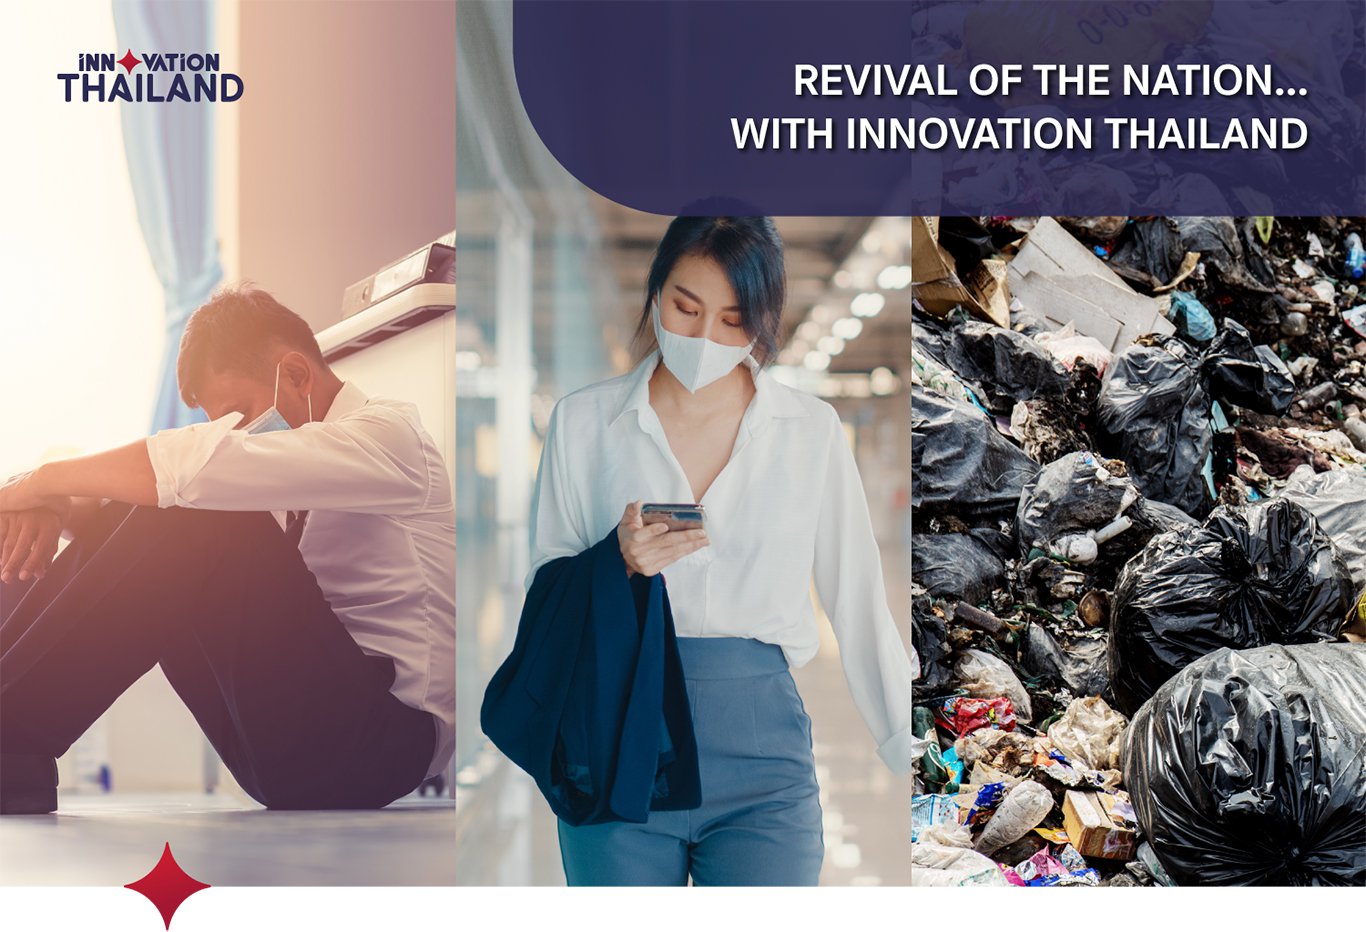 REVIVAL OF THE NATION WITH INNOVATION THAILAND